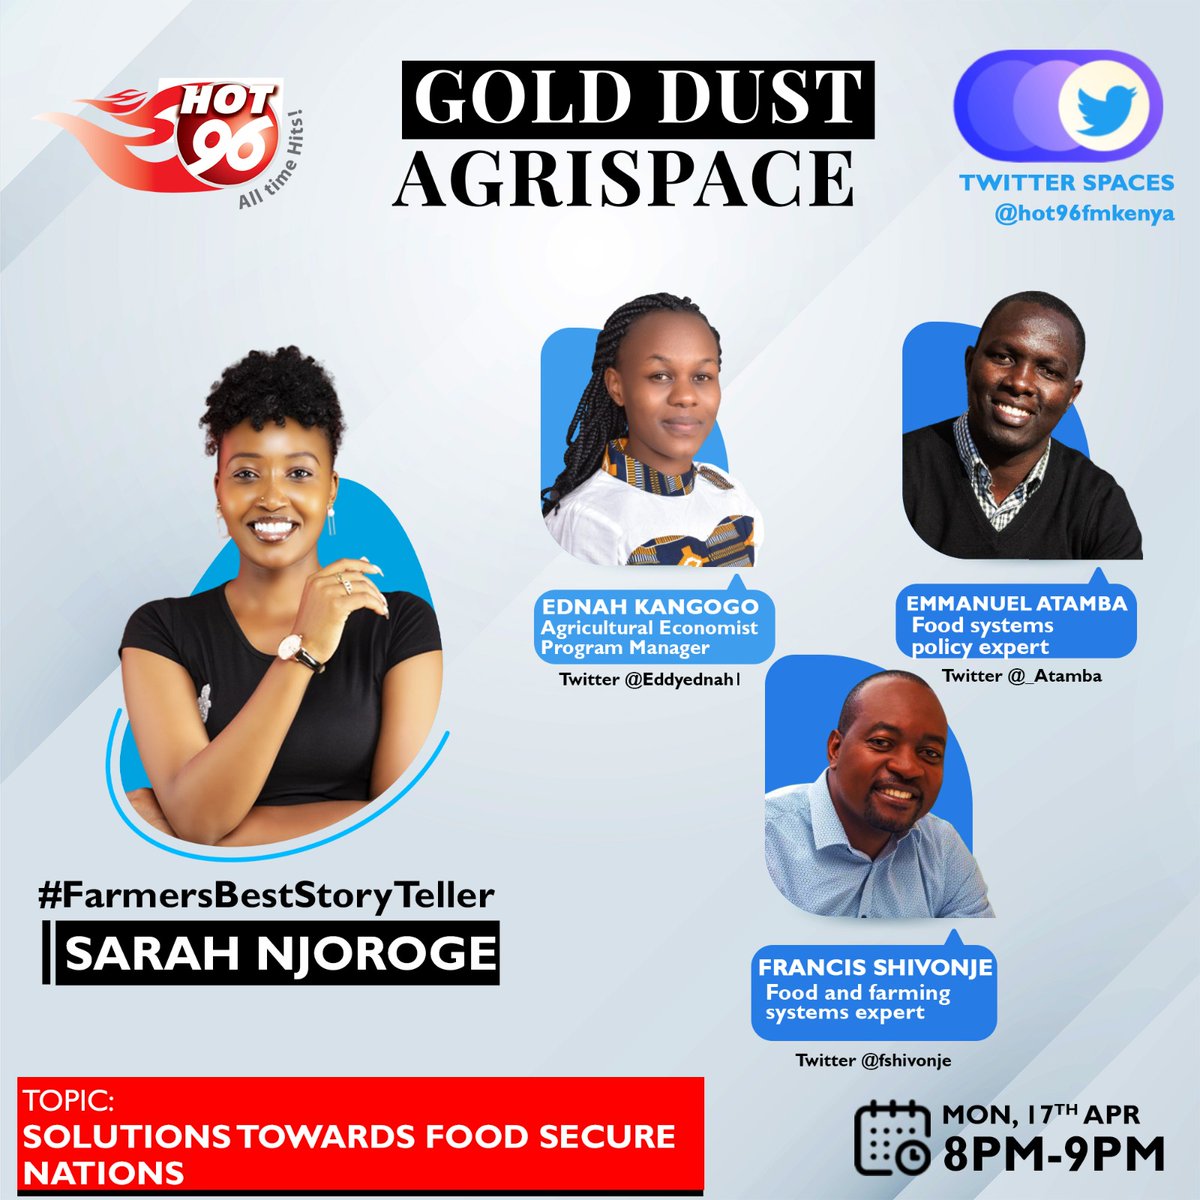 A food-secure nation is one where everyone has access to sufficient, safe & nutritious food at all times without compromising their economic, social and cultural well-being. 

Tune in to @Hot_96Kenya from 8 pm to 9 pm on April 17 2023, on #GoldDustAgriSpace for the conversation